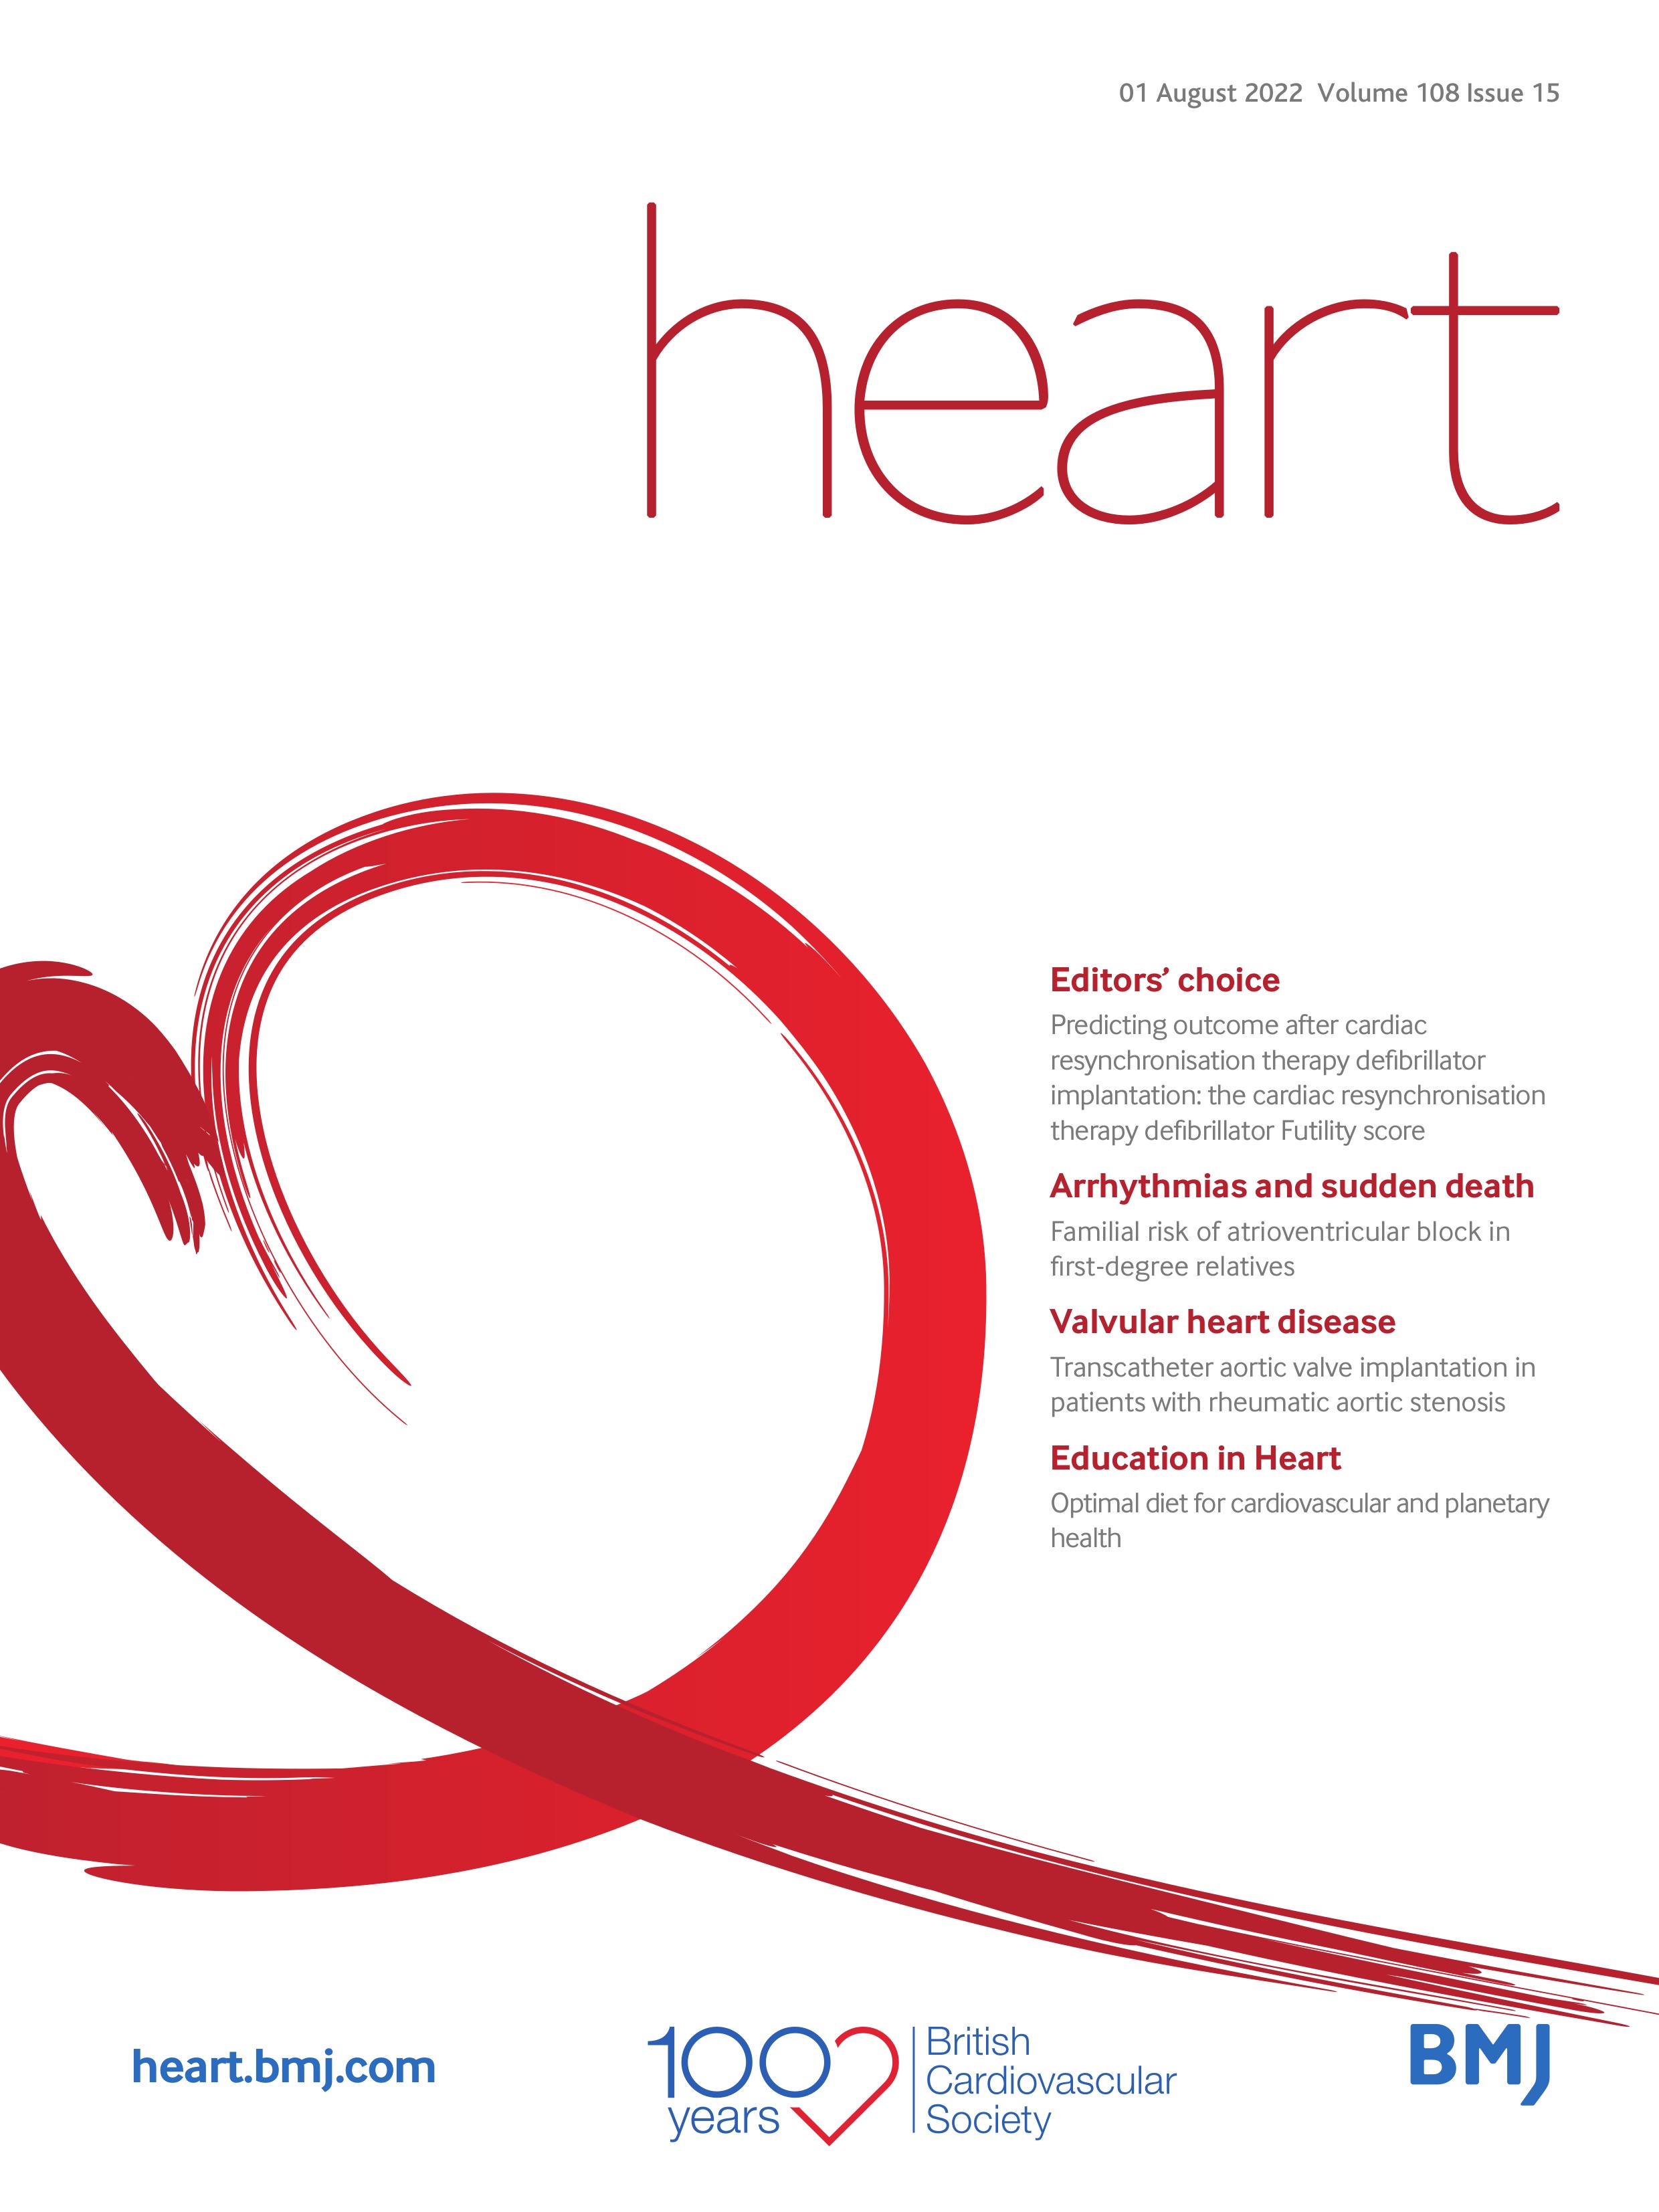 Non-cardiac surgery in patients with valvular heart disease